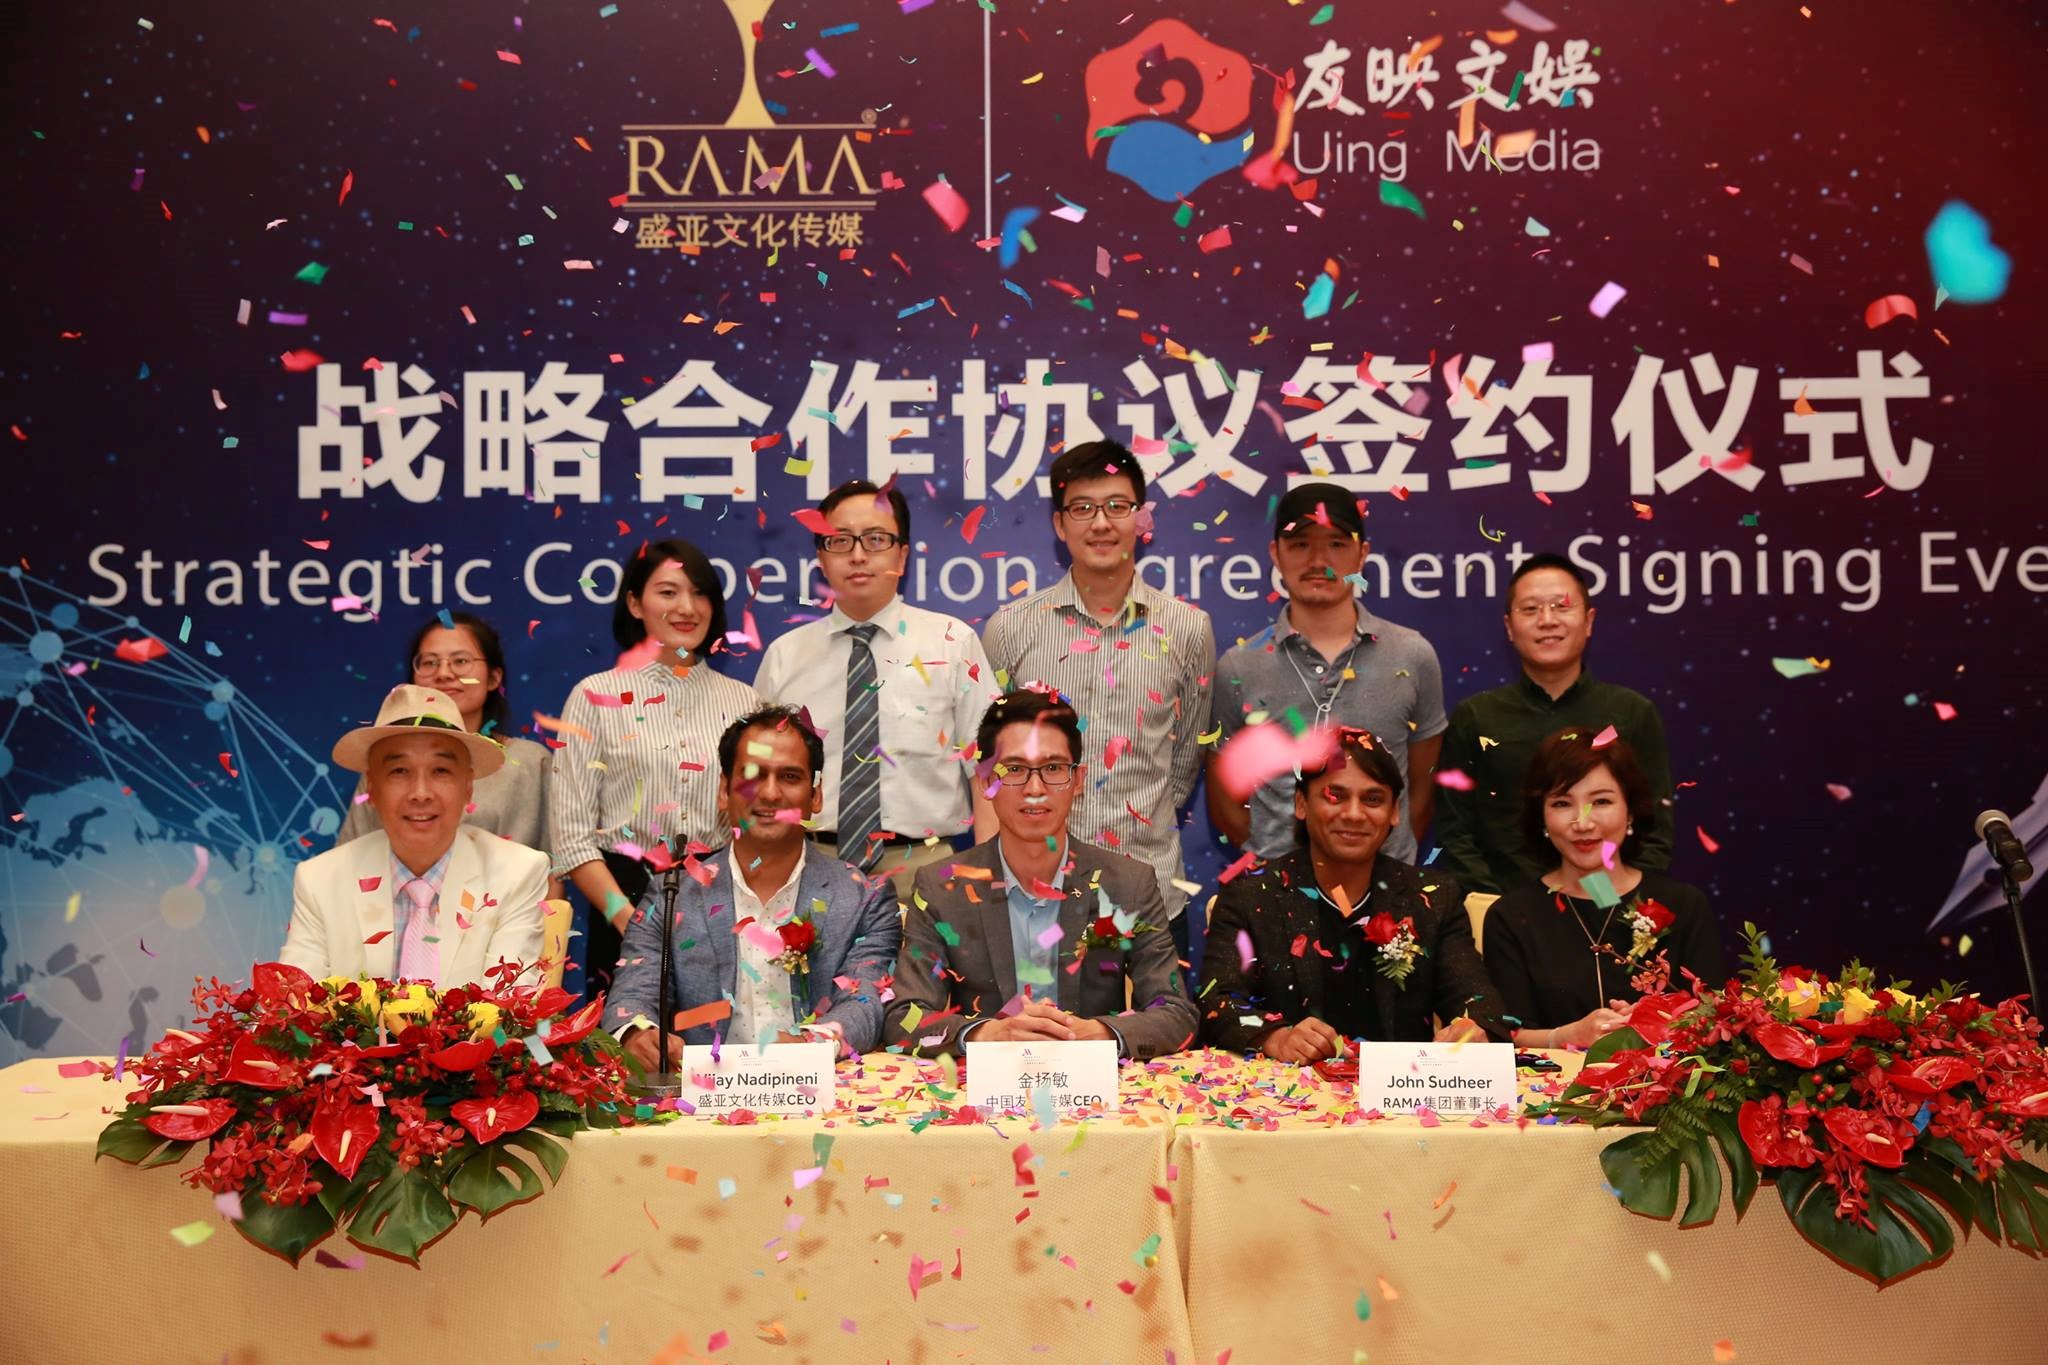 RAMA China signs MOU with Uing Holdings China